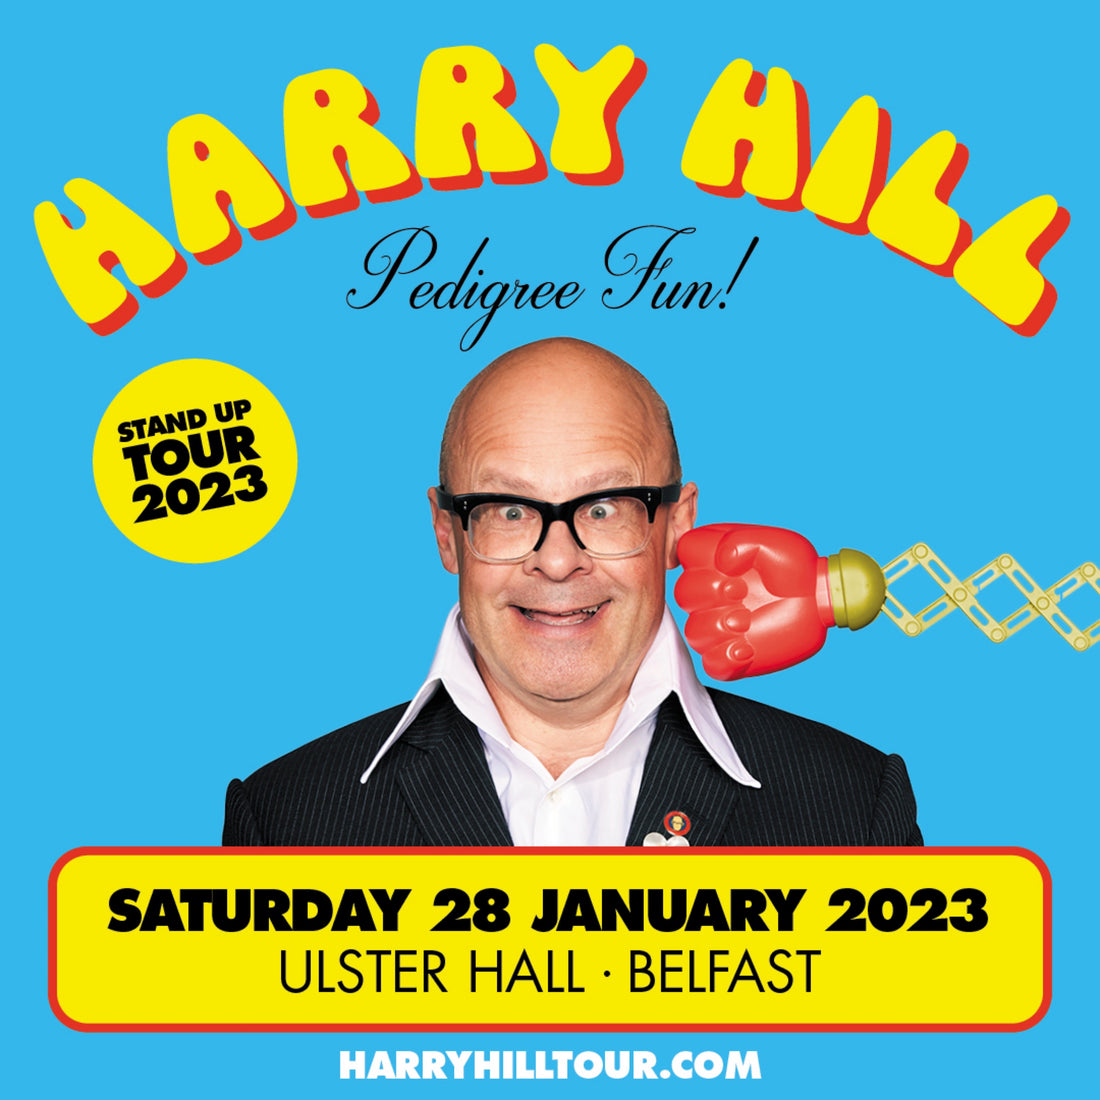 Harry Hill is bringing his Pedigree Fun! Tour to Belfast’s Ulster Hall